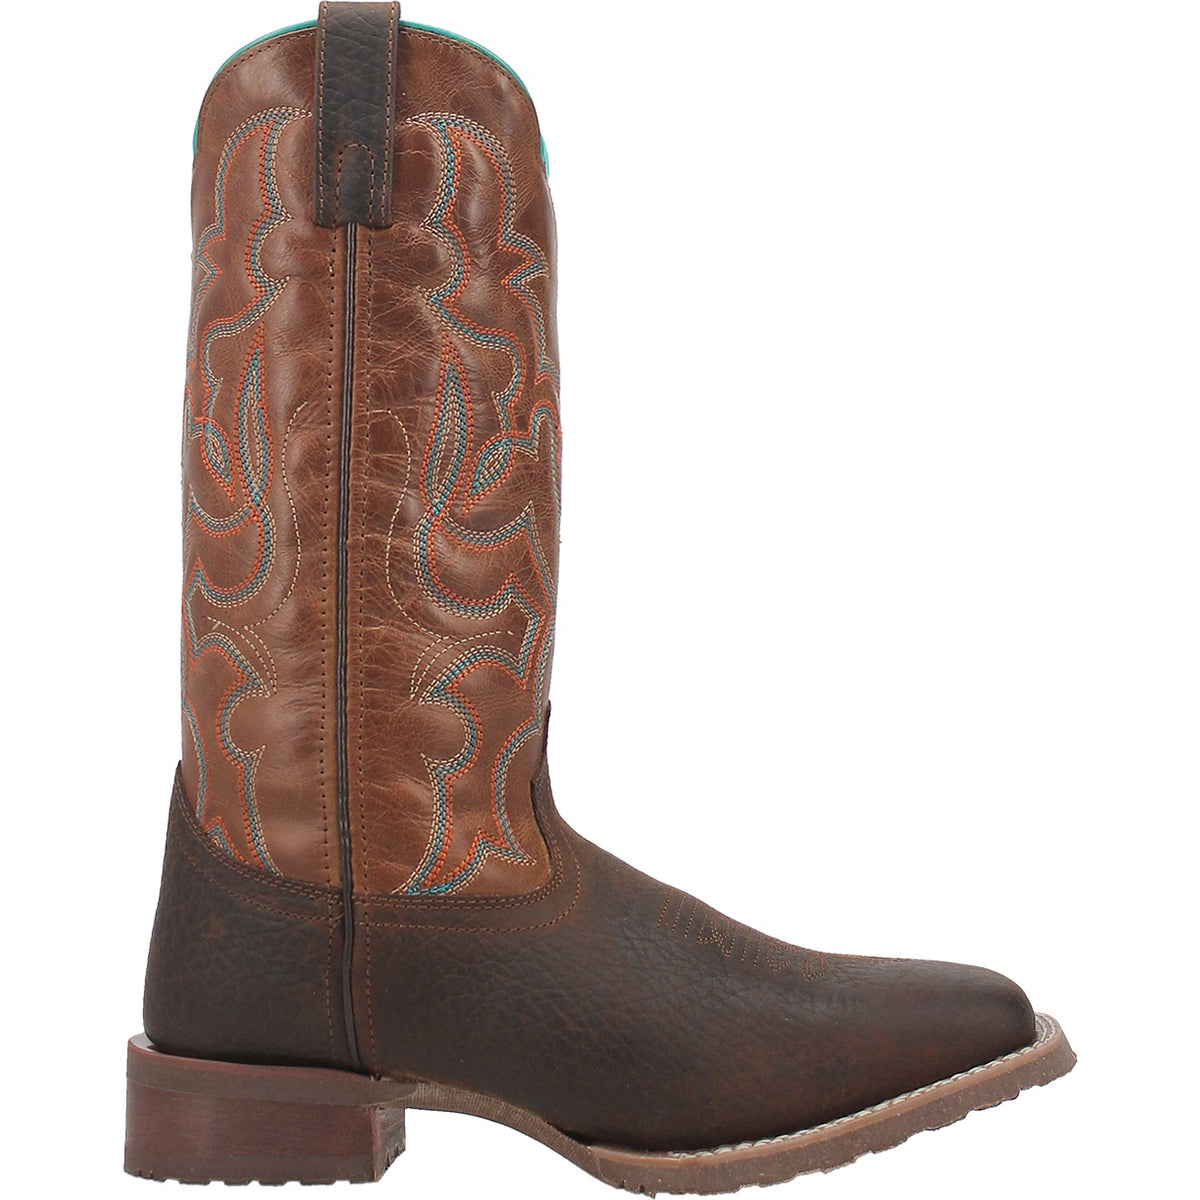 ODIE LEATHER BOOT Cover